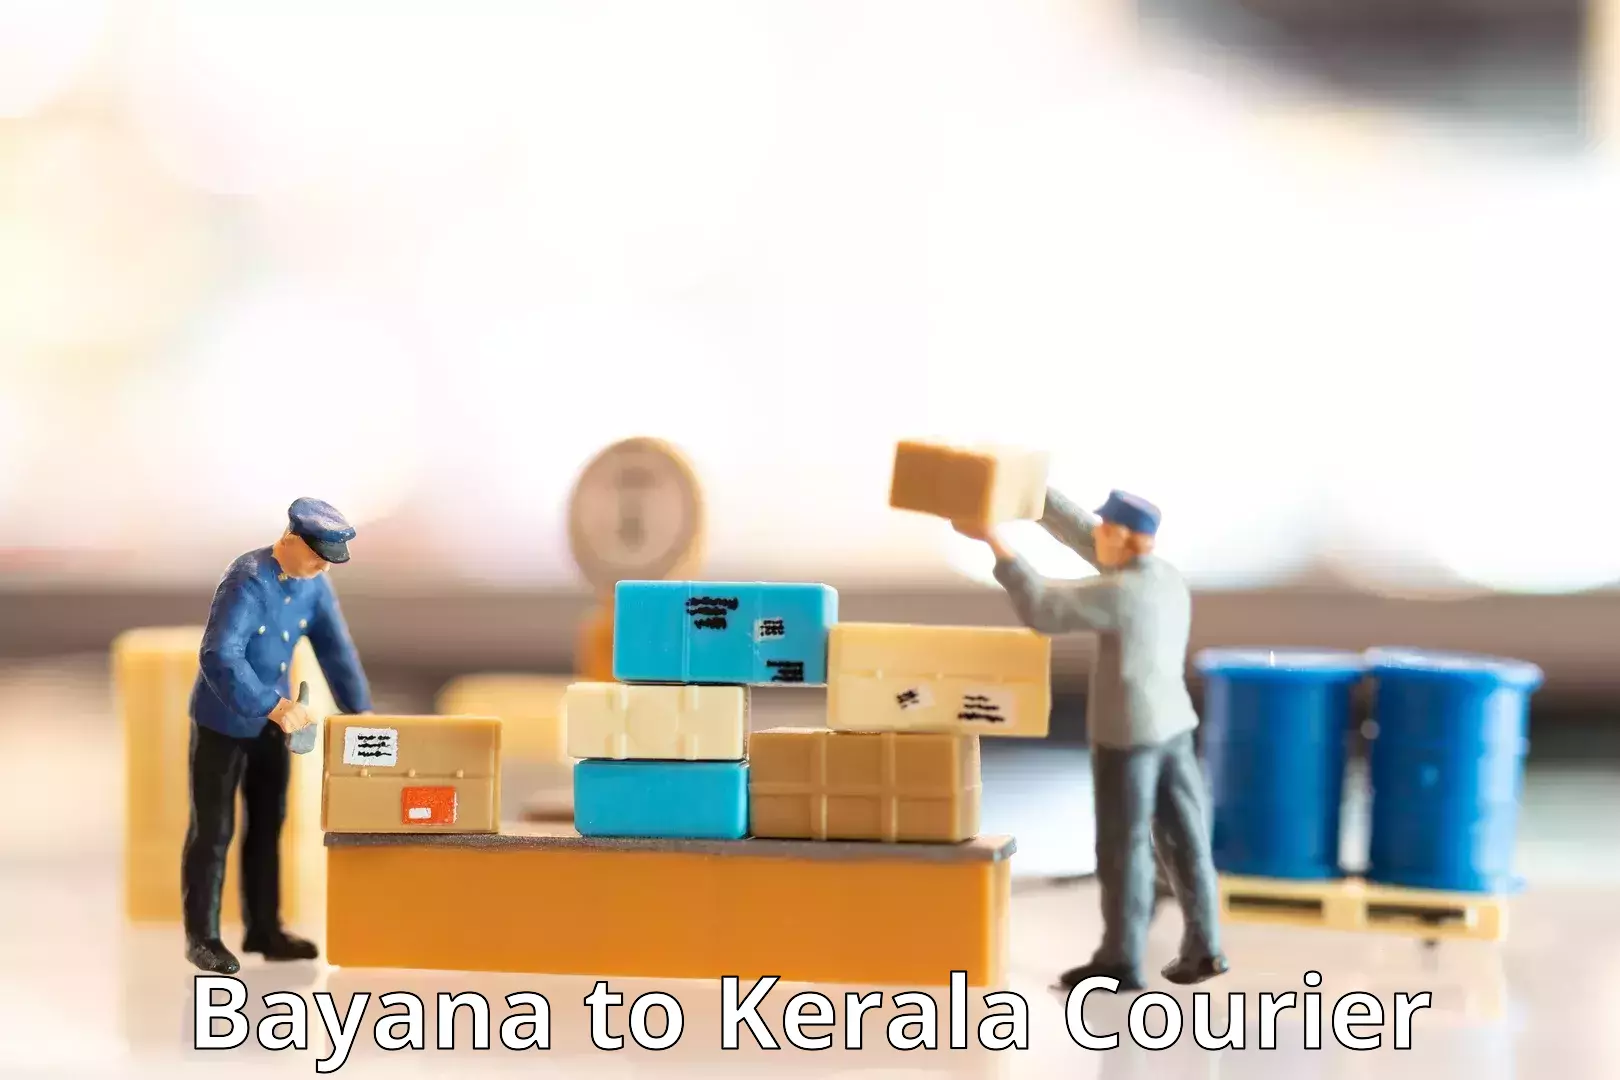 Express delivery capabilities Bayana to Kerala